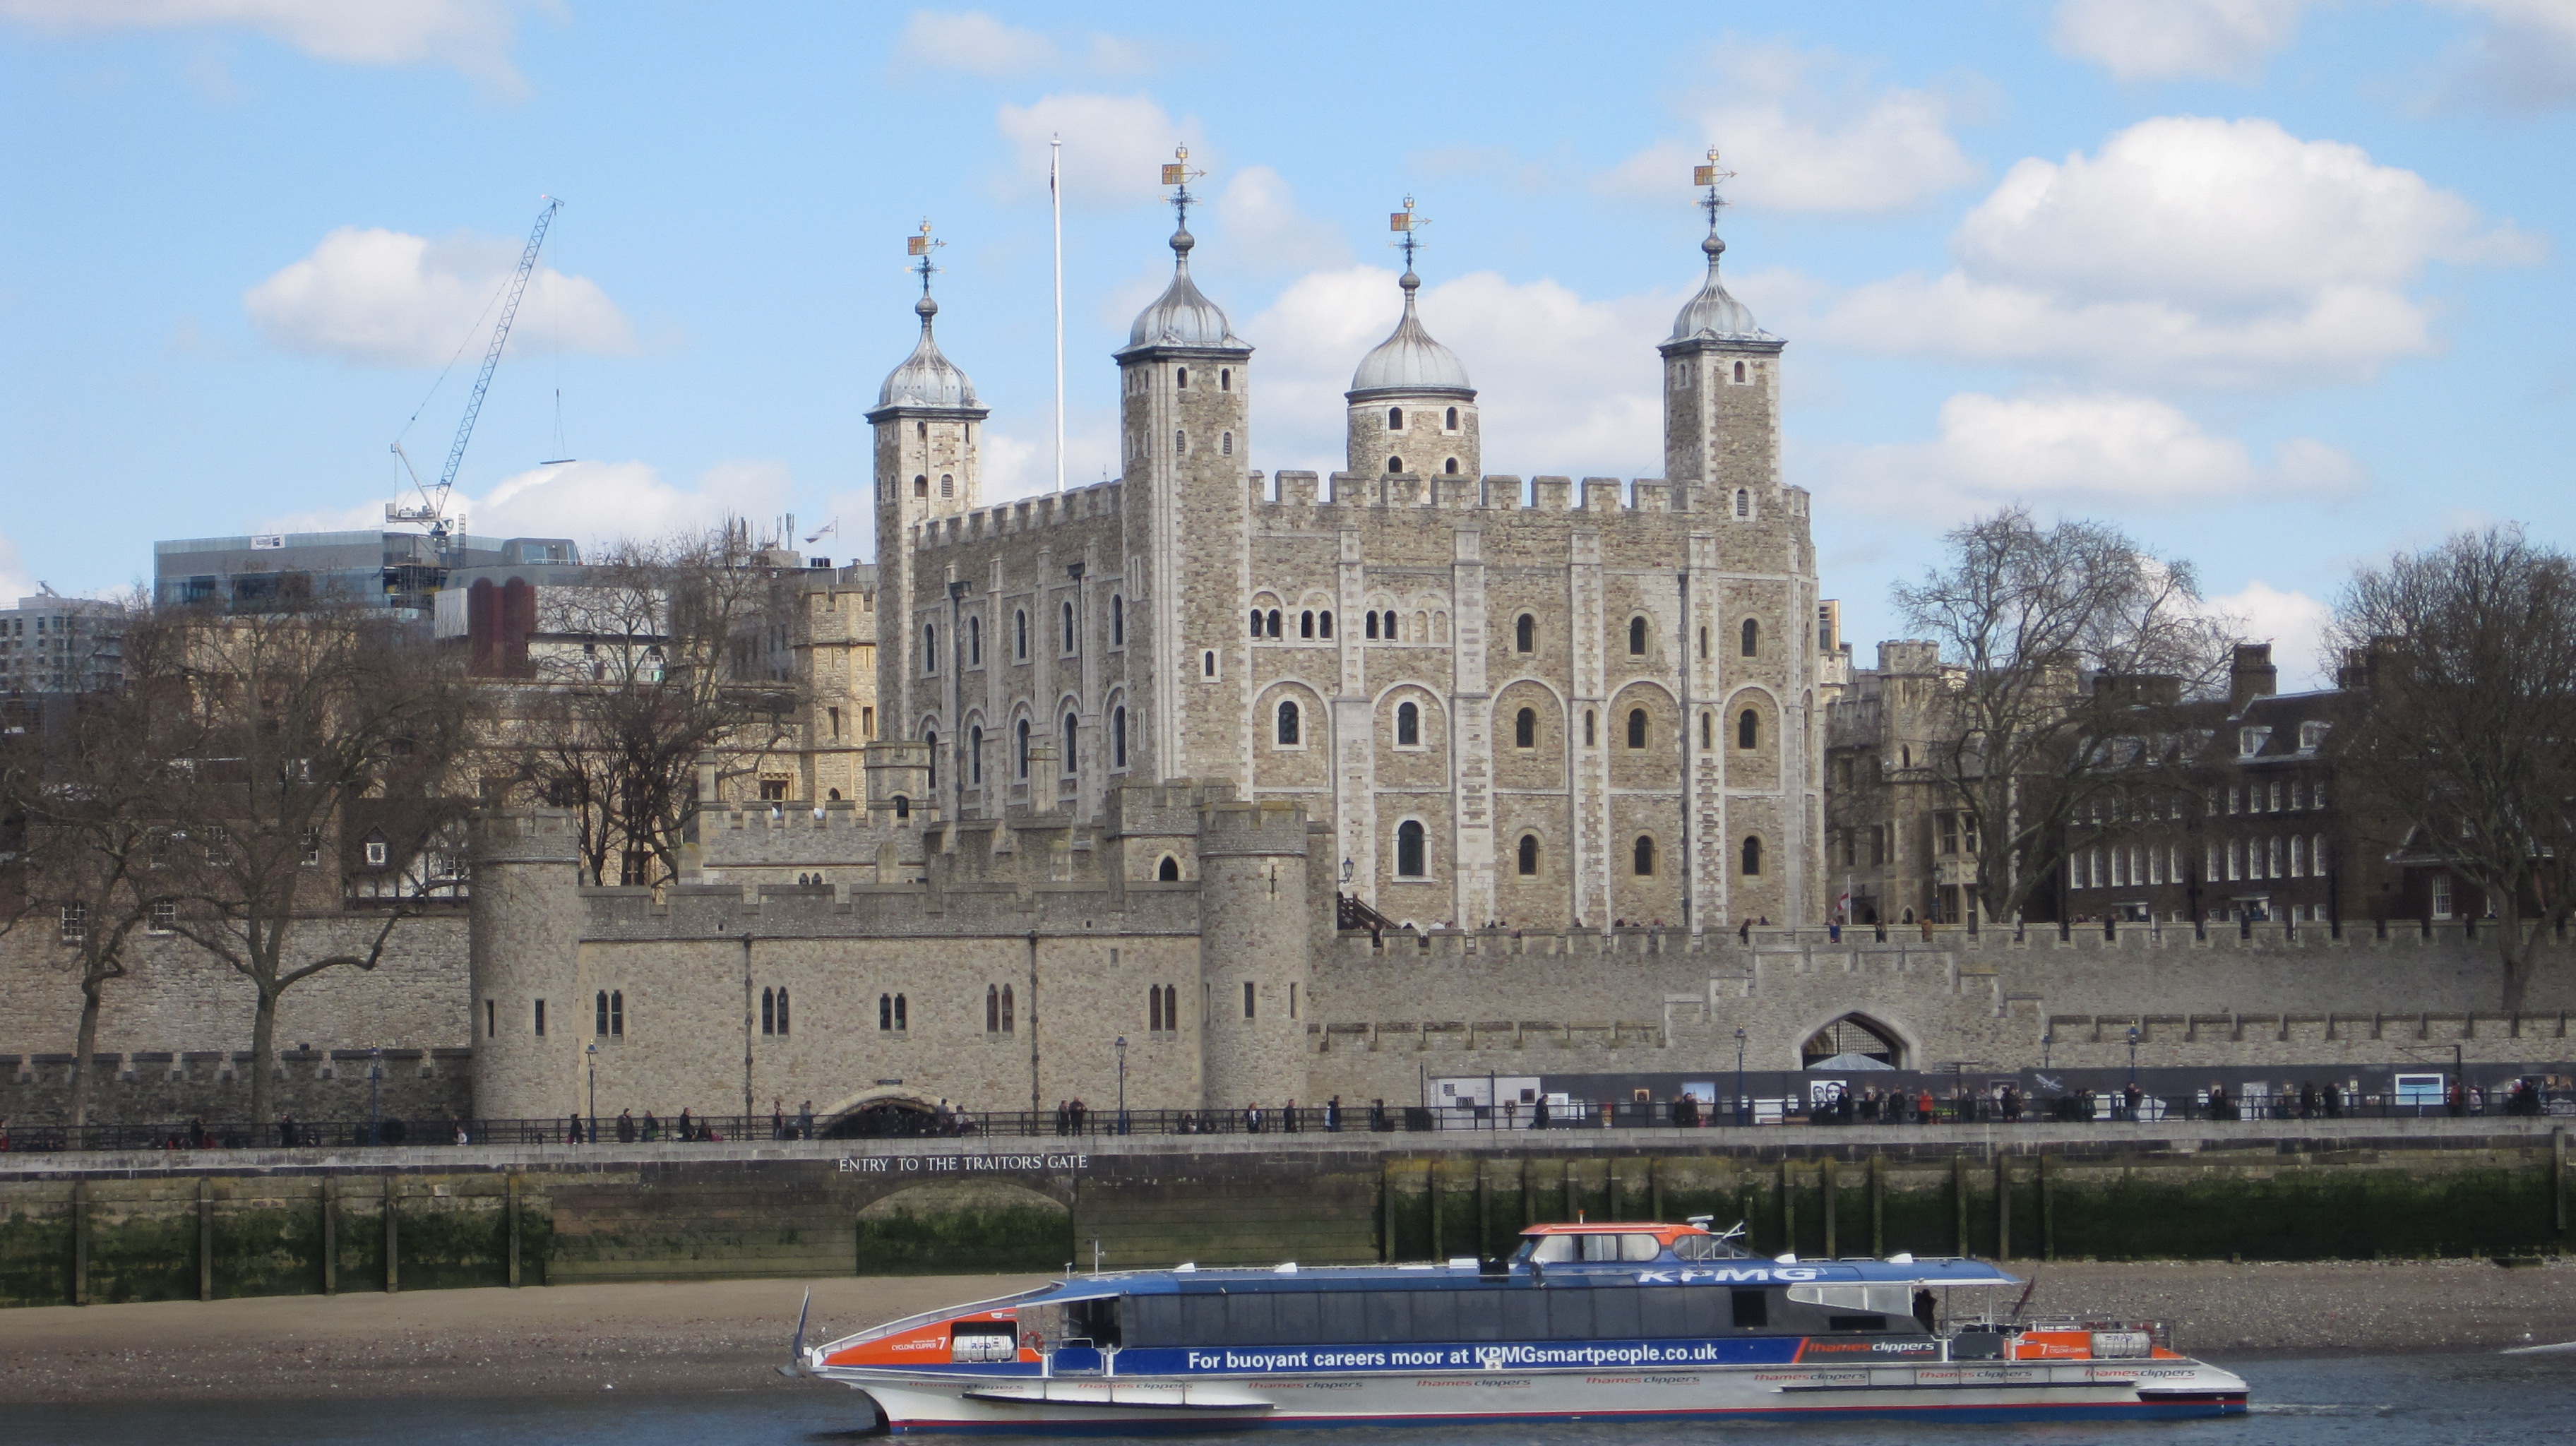 Tower of London by Juliamaud